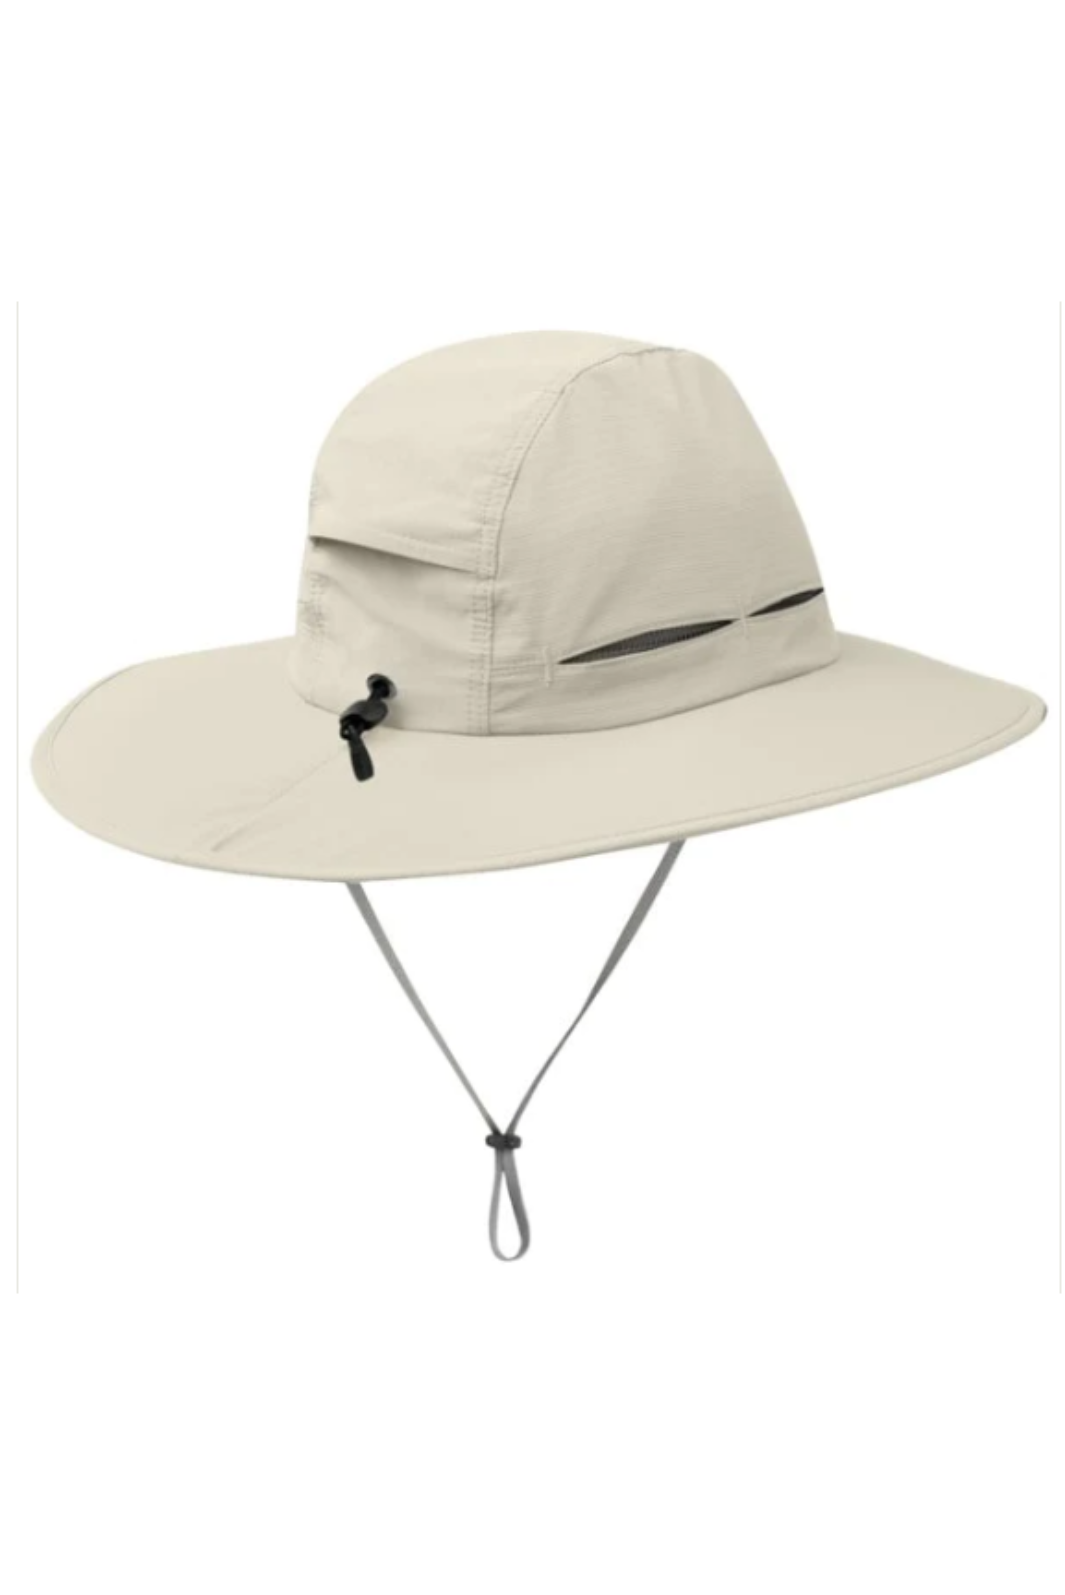 Outdoor Research Sunriolet Hat